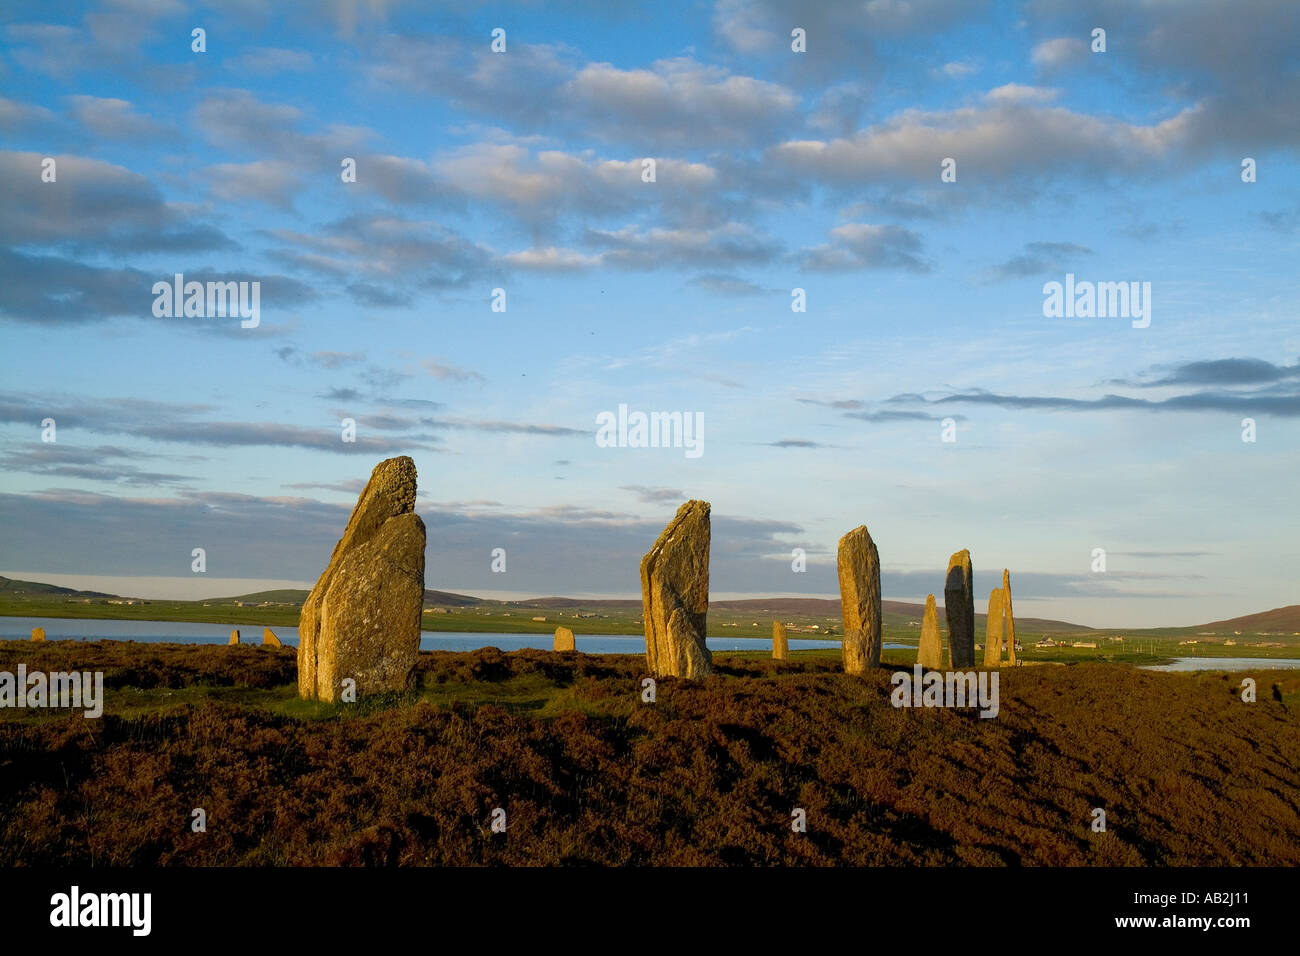 dh World heritage site RING OF BRODGAR ORKNEY Neolithic standing stones henge circle scotland islands site uk stone circles Stock Photo